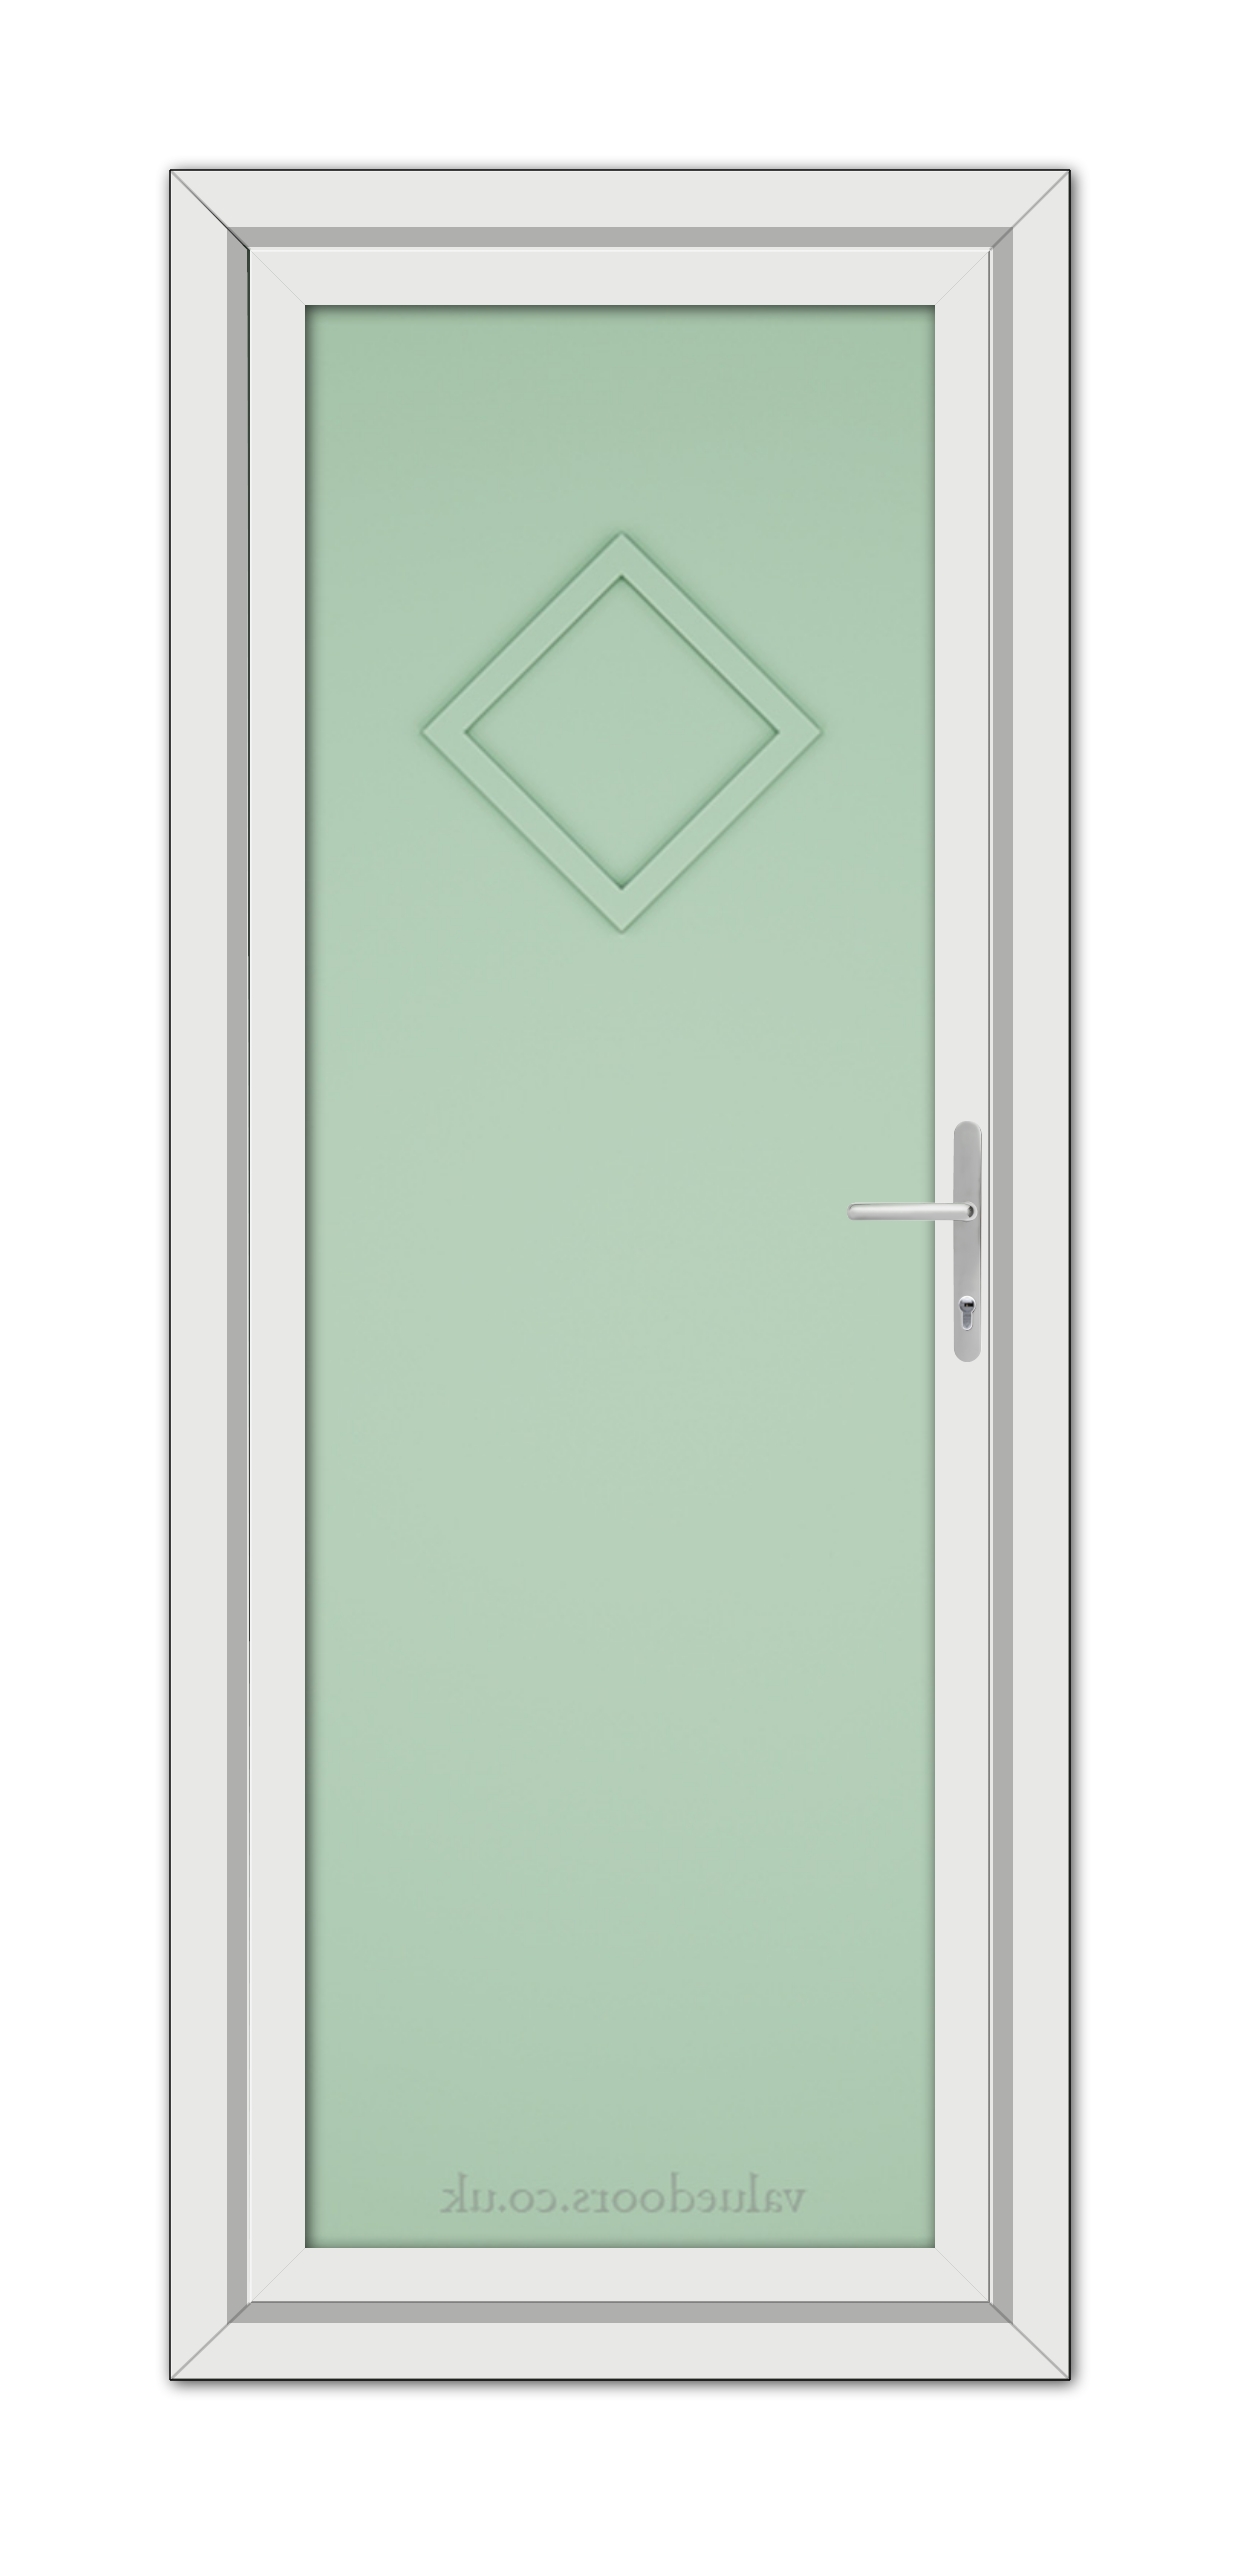 A Chartwell Green Modern 5131 Solid uPVC Door with a diamond-shaped window and a silver handle, set within a white frame.